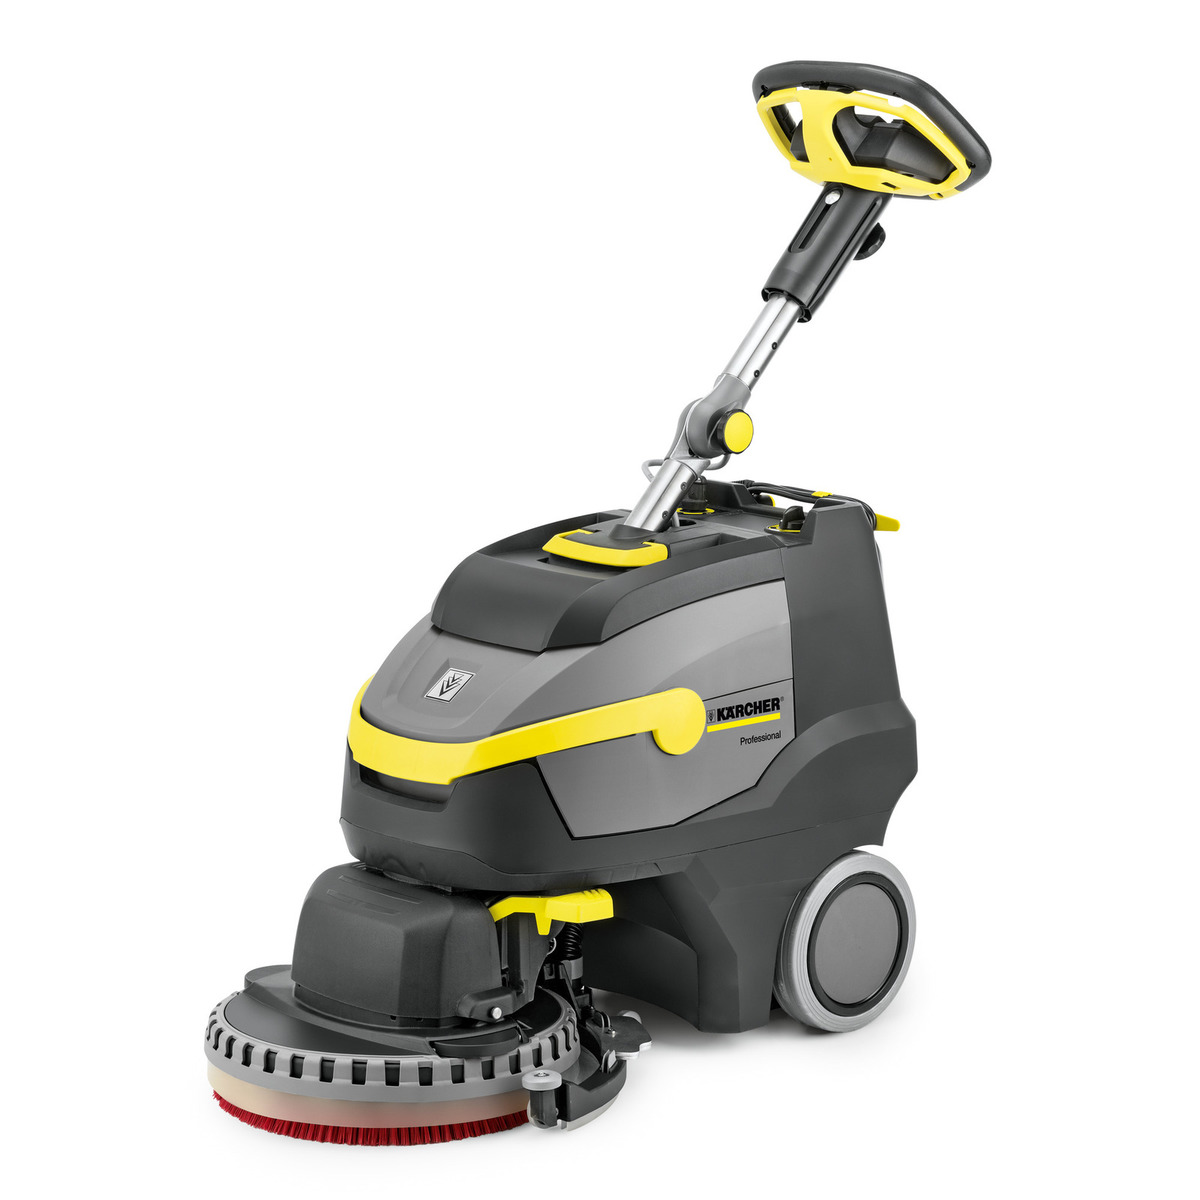 Karcher BD 38/12 C BP Compact Walk-Behind Auto Scrubber karcher, BD, 38/12, c, bp, compact, commercial, walk-behind, auto-scrubber, professional, industrial, powerful, maneuverable, easy, effective, 